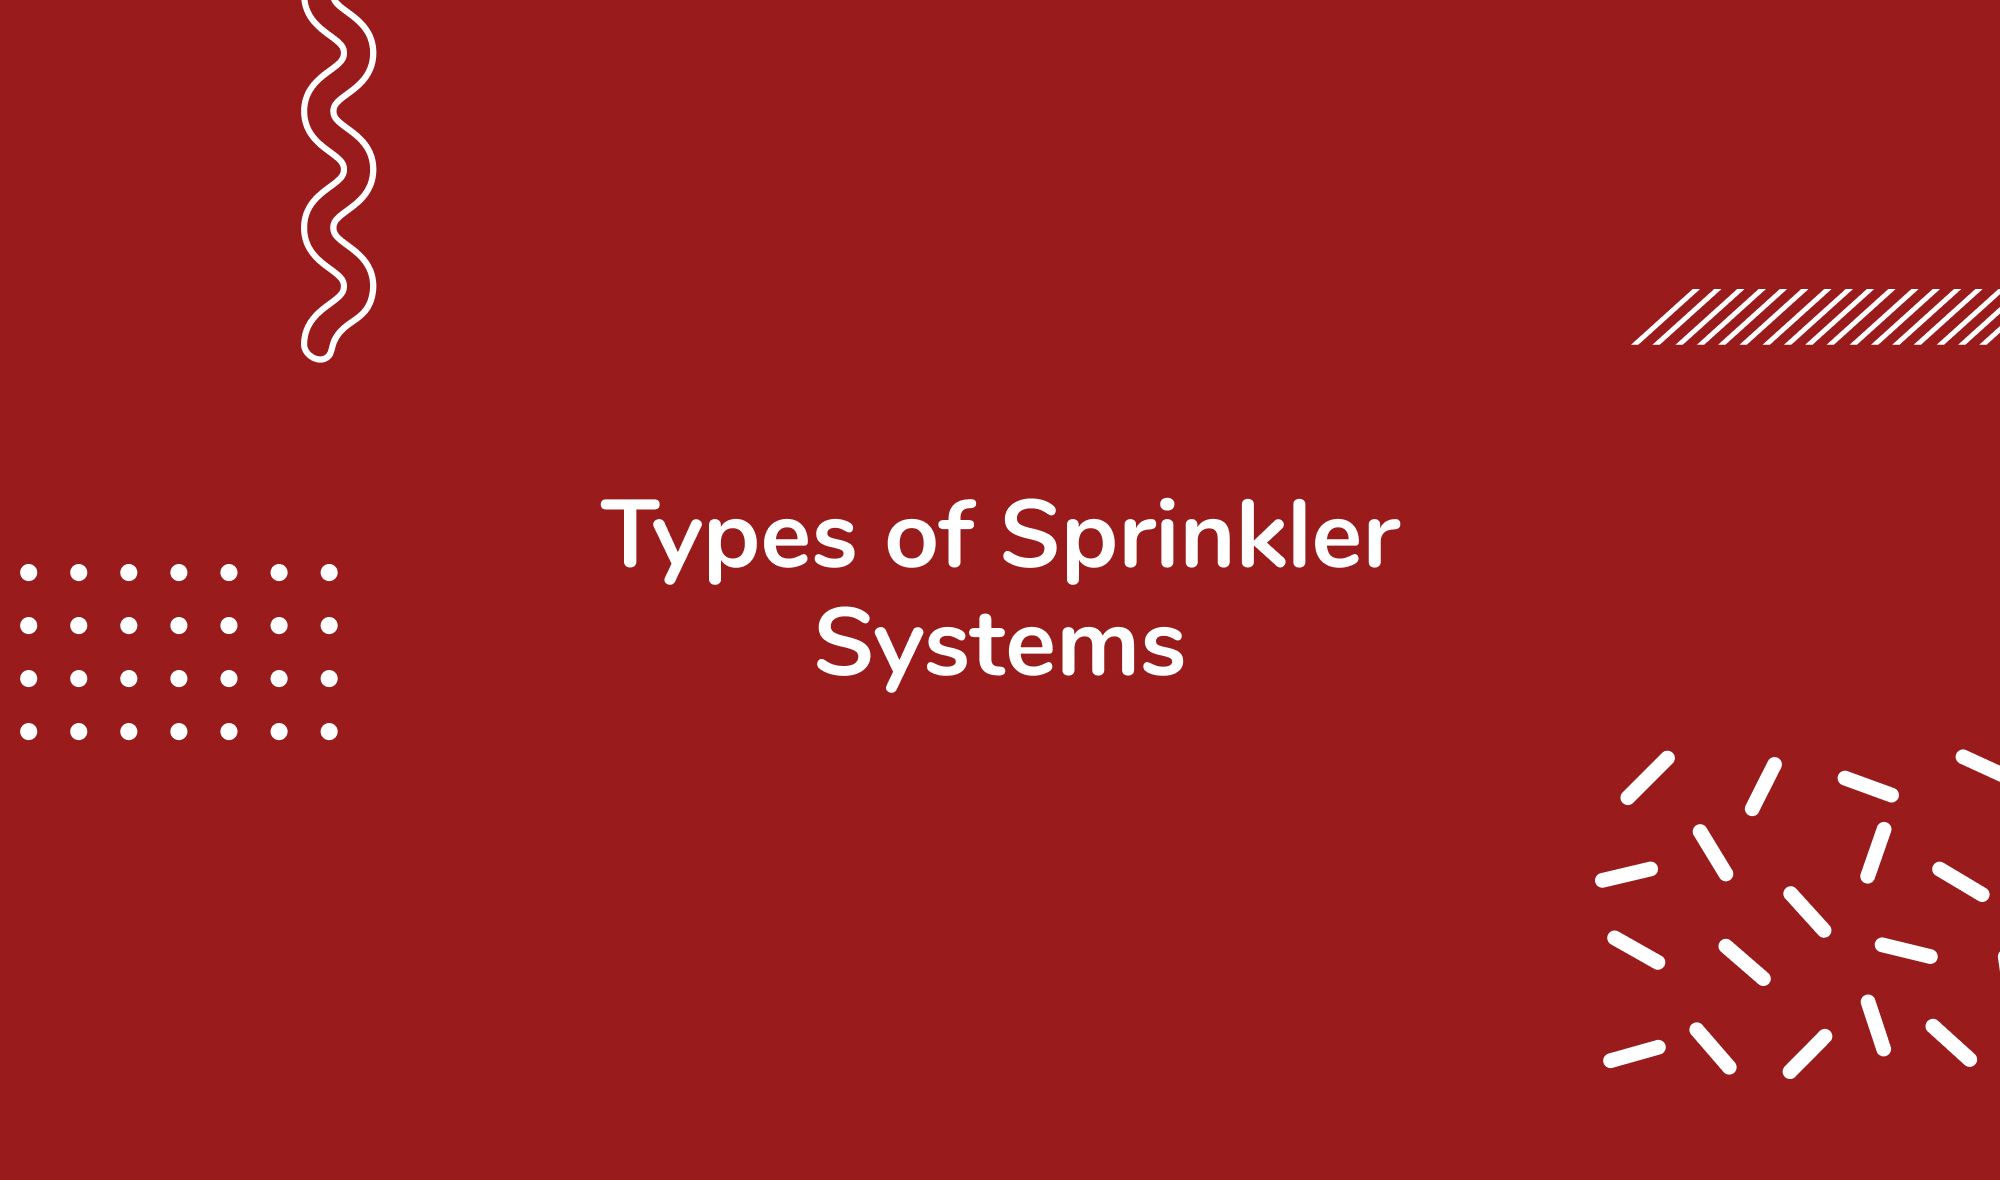 Types of Sprinkler Systems: Above Ground vs. In Ground